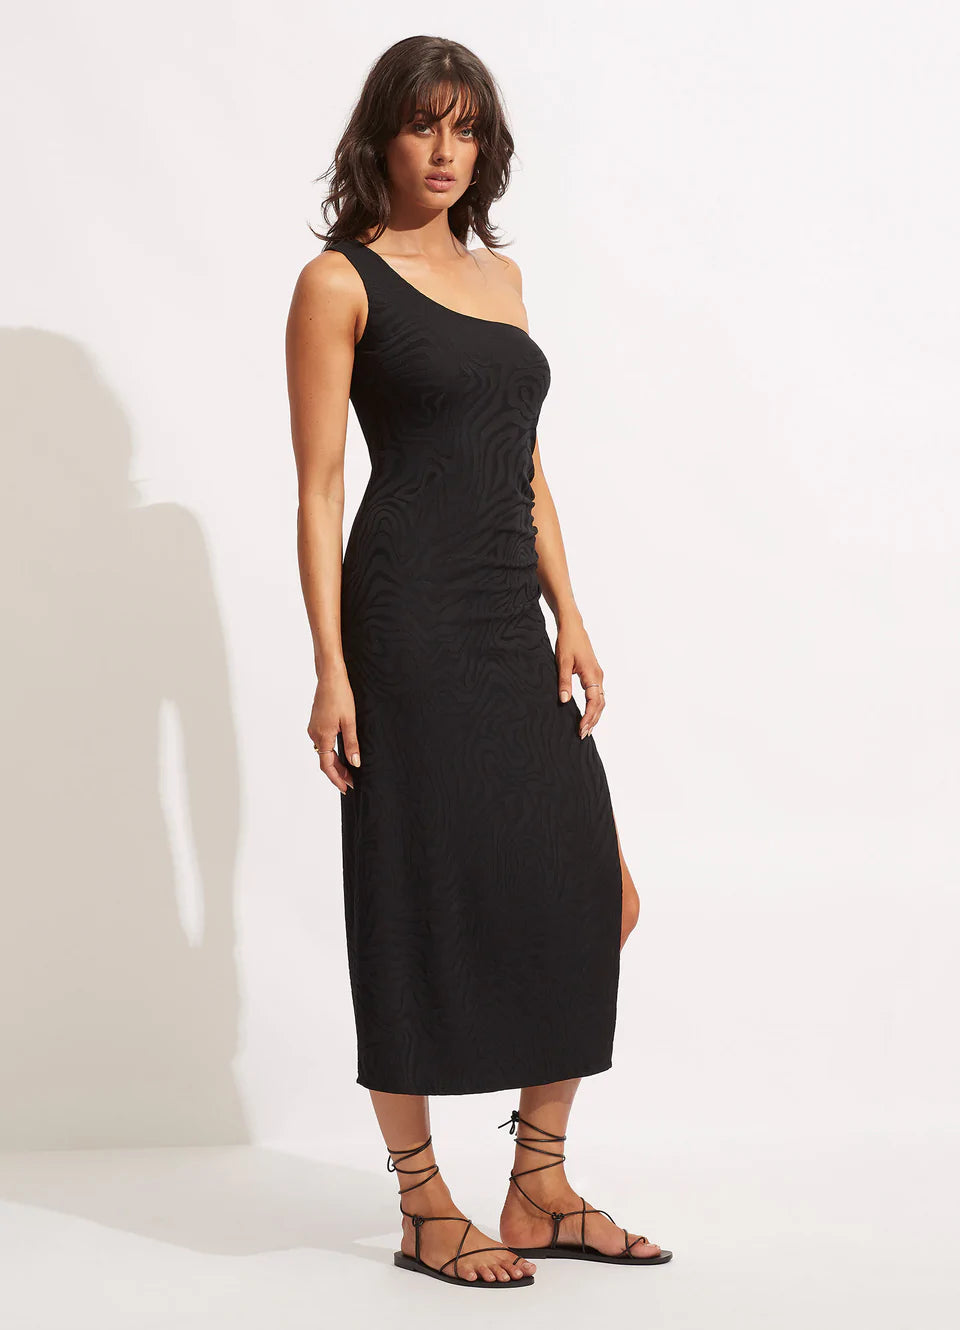 Seafolly Second Wave One Shoulder Midi Dress